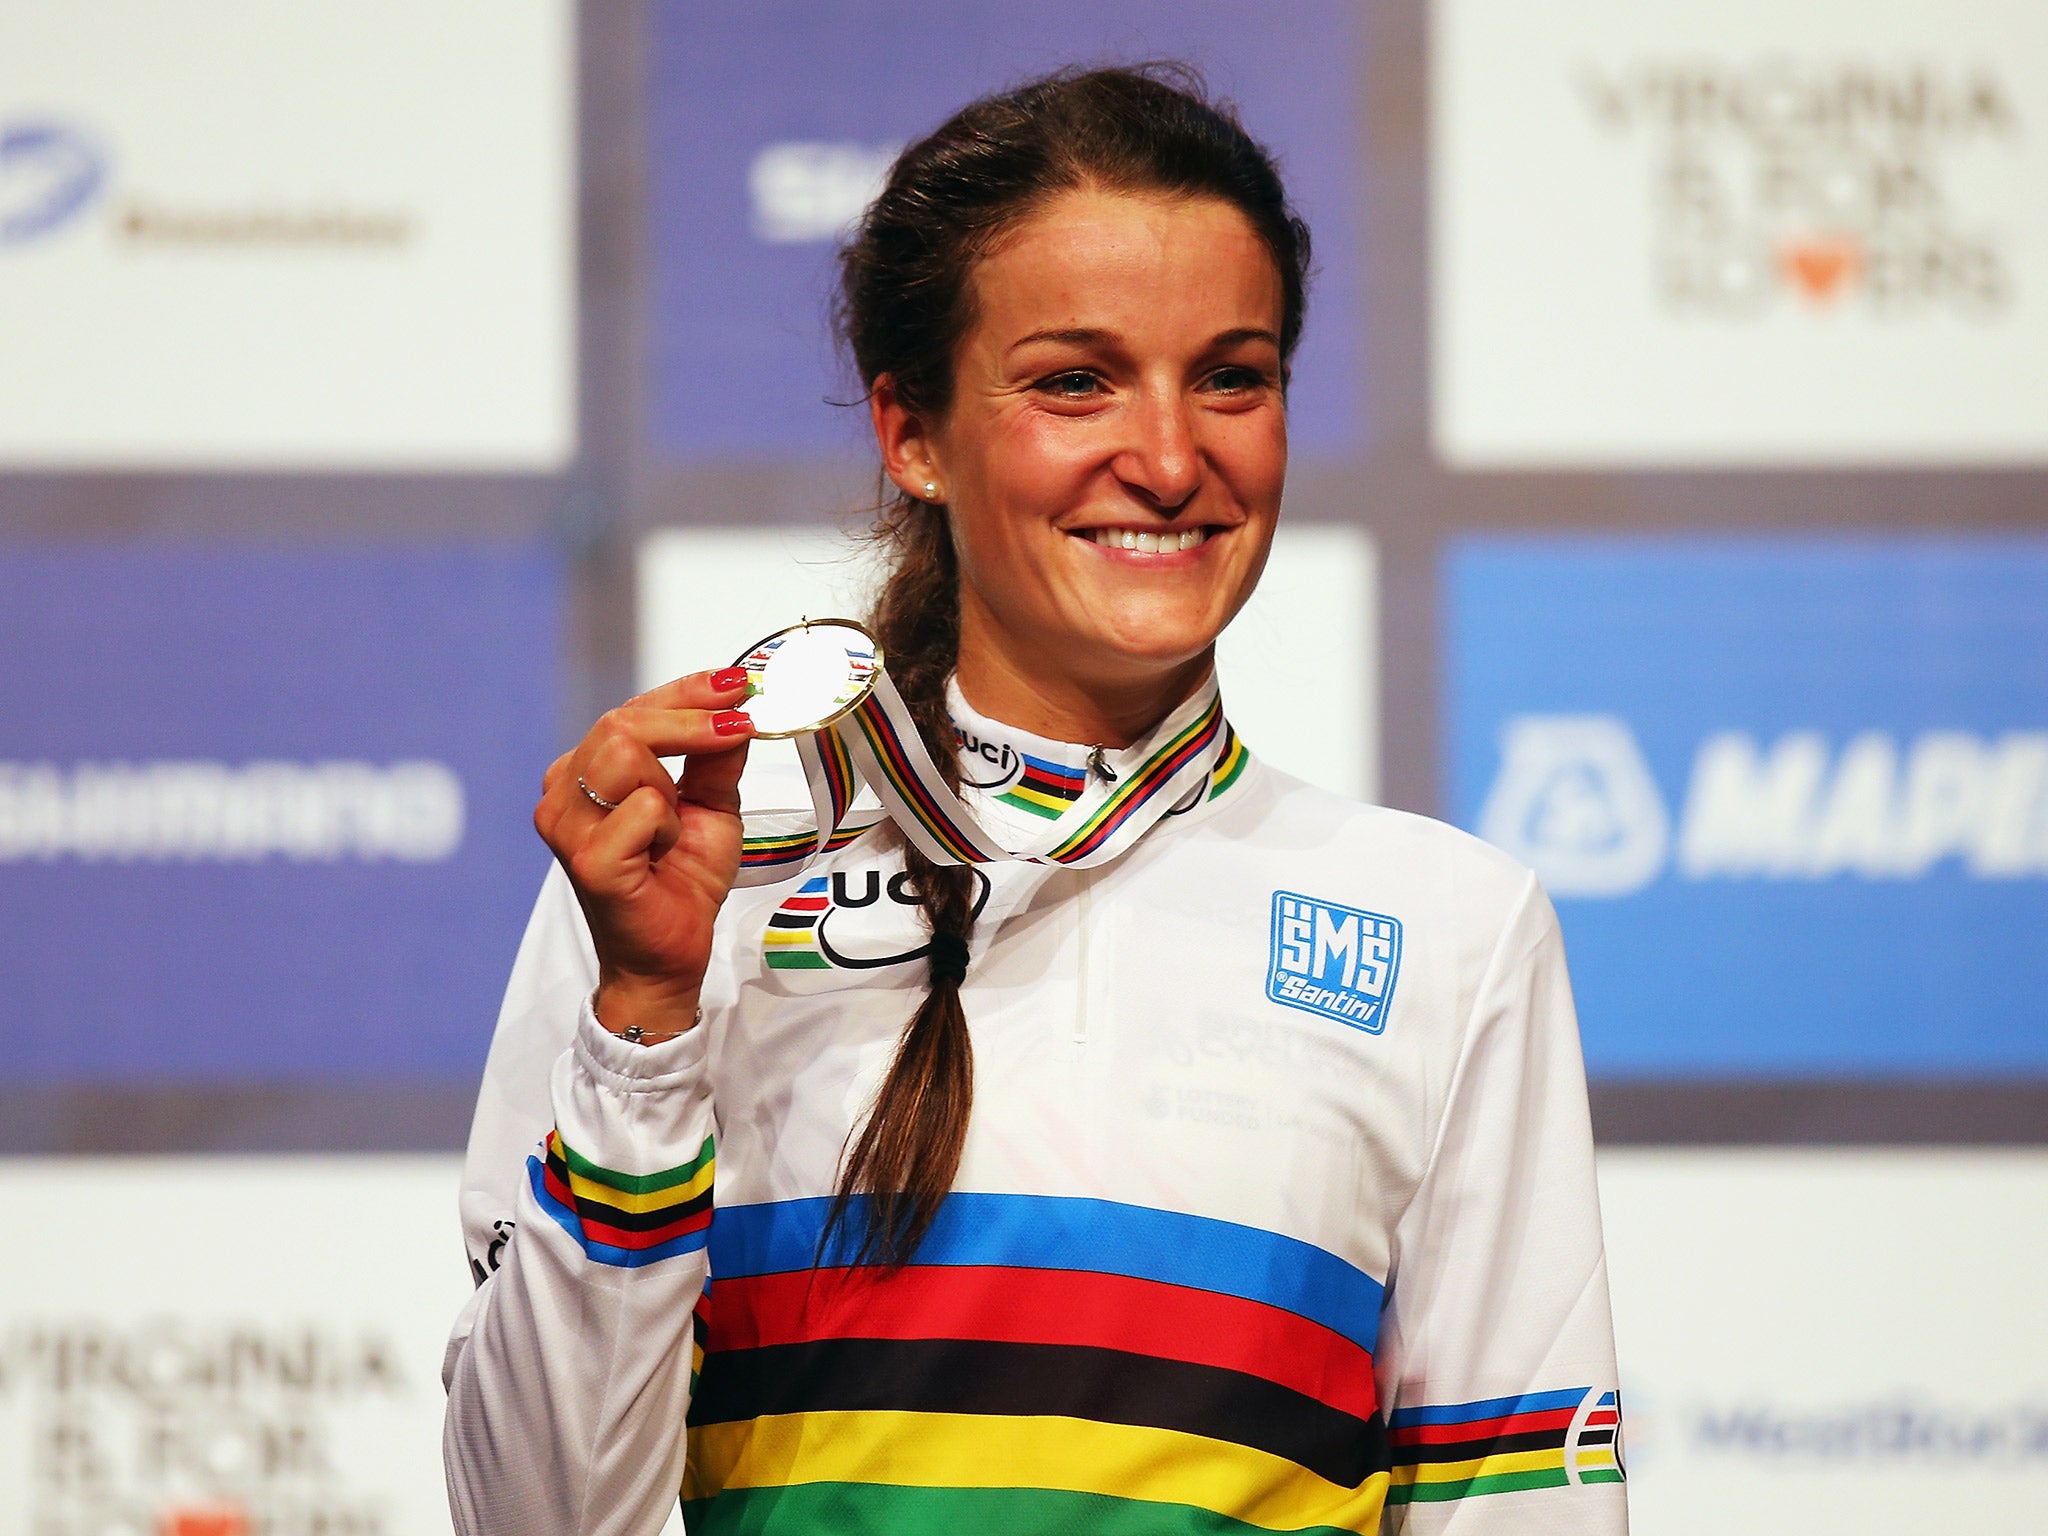 Lizzie Armitstead avoided a two-year ban despite missing three drugs tests